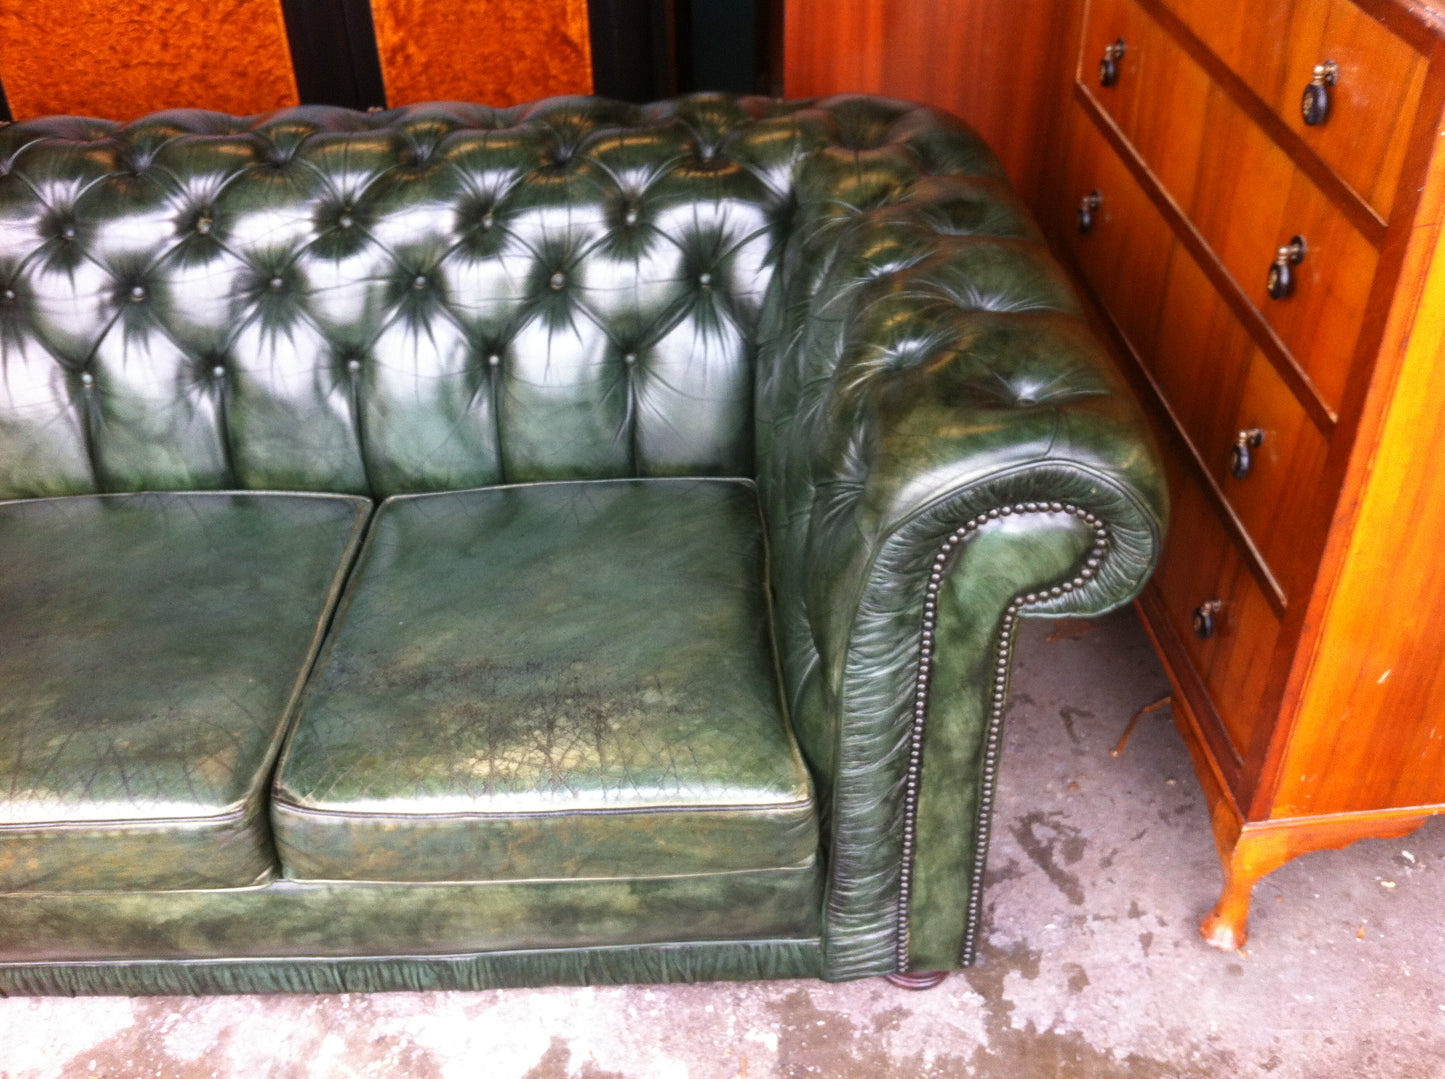 Vintage Wade "Antique" Green Hand Dyed Leather Chesterfield Sofa Circa.1970